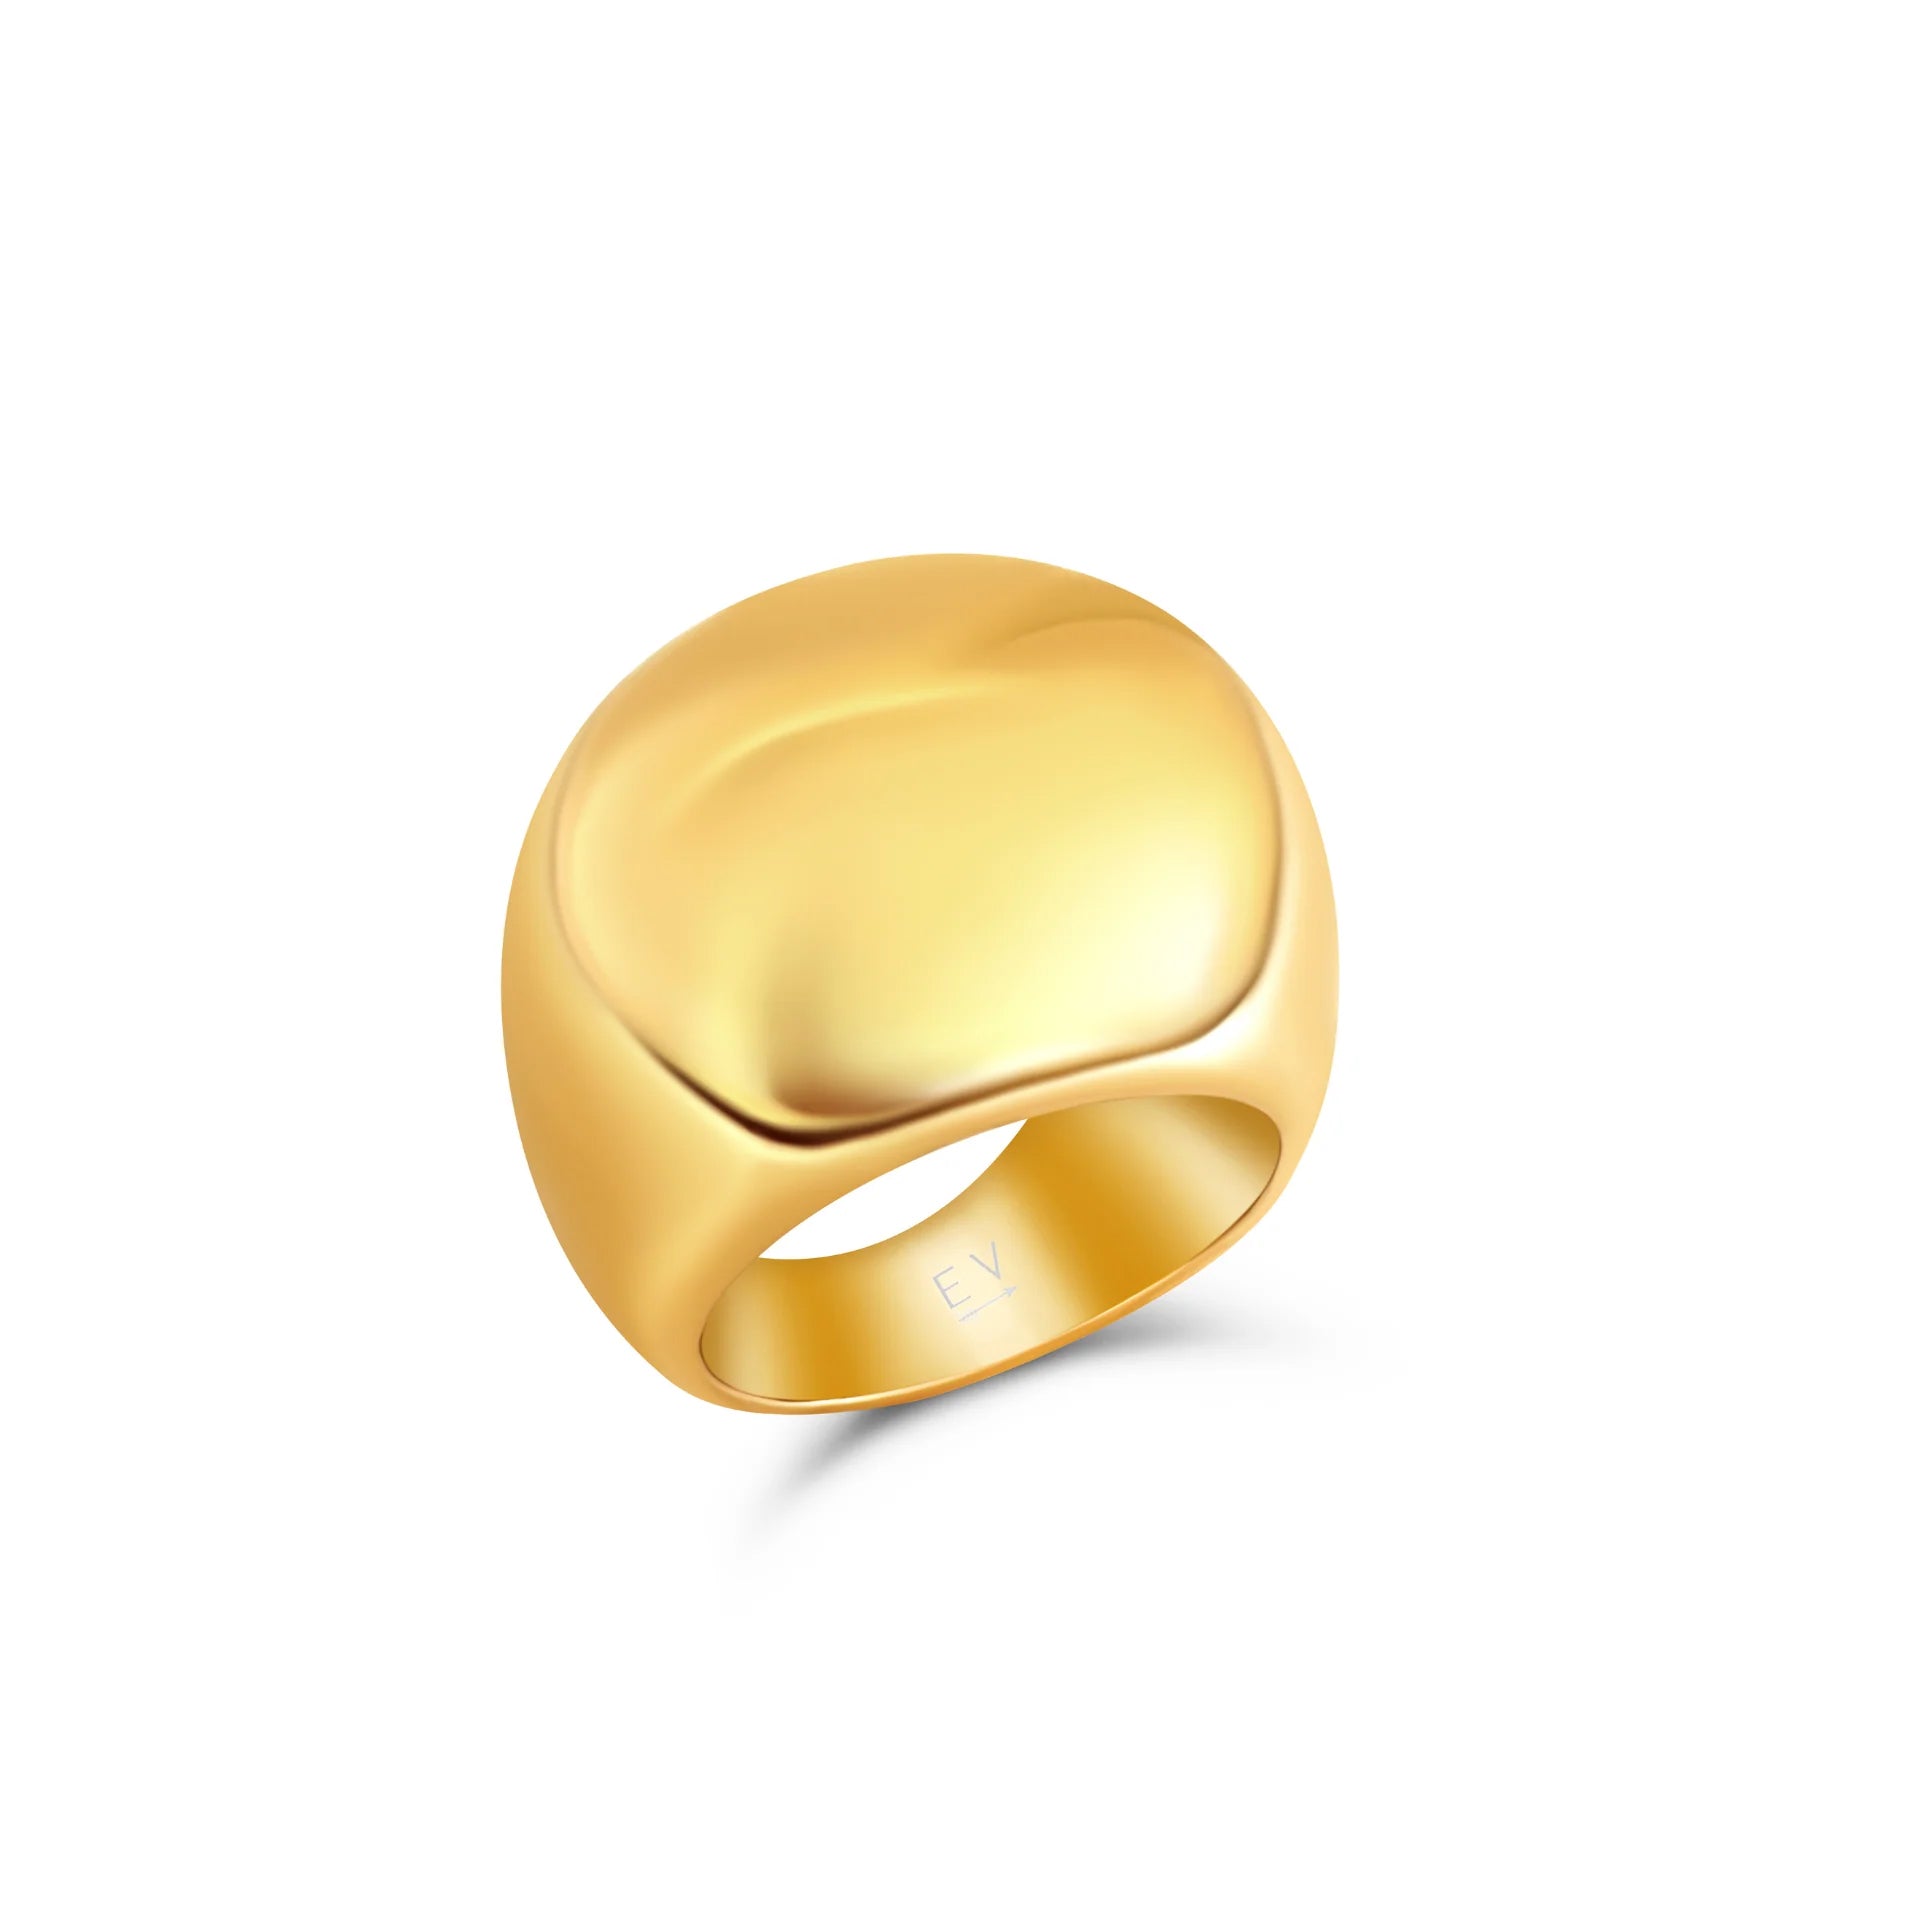 Ellie Vail Oversized Dome Ring Gold 7